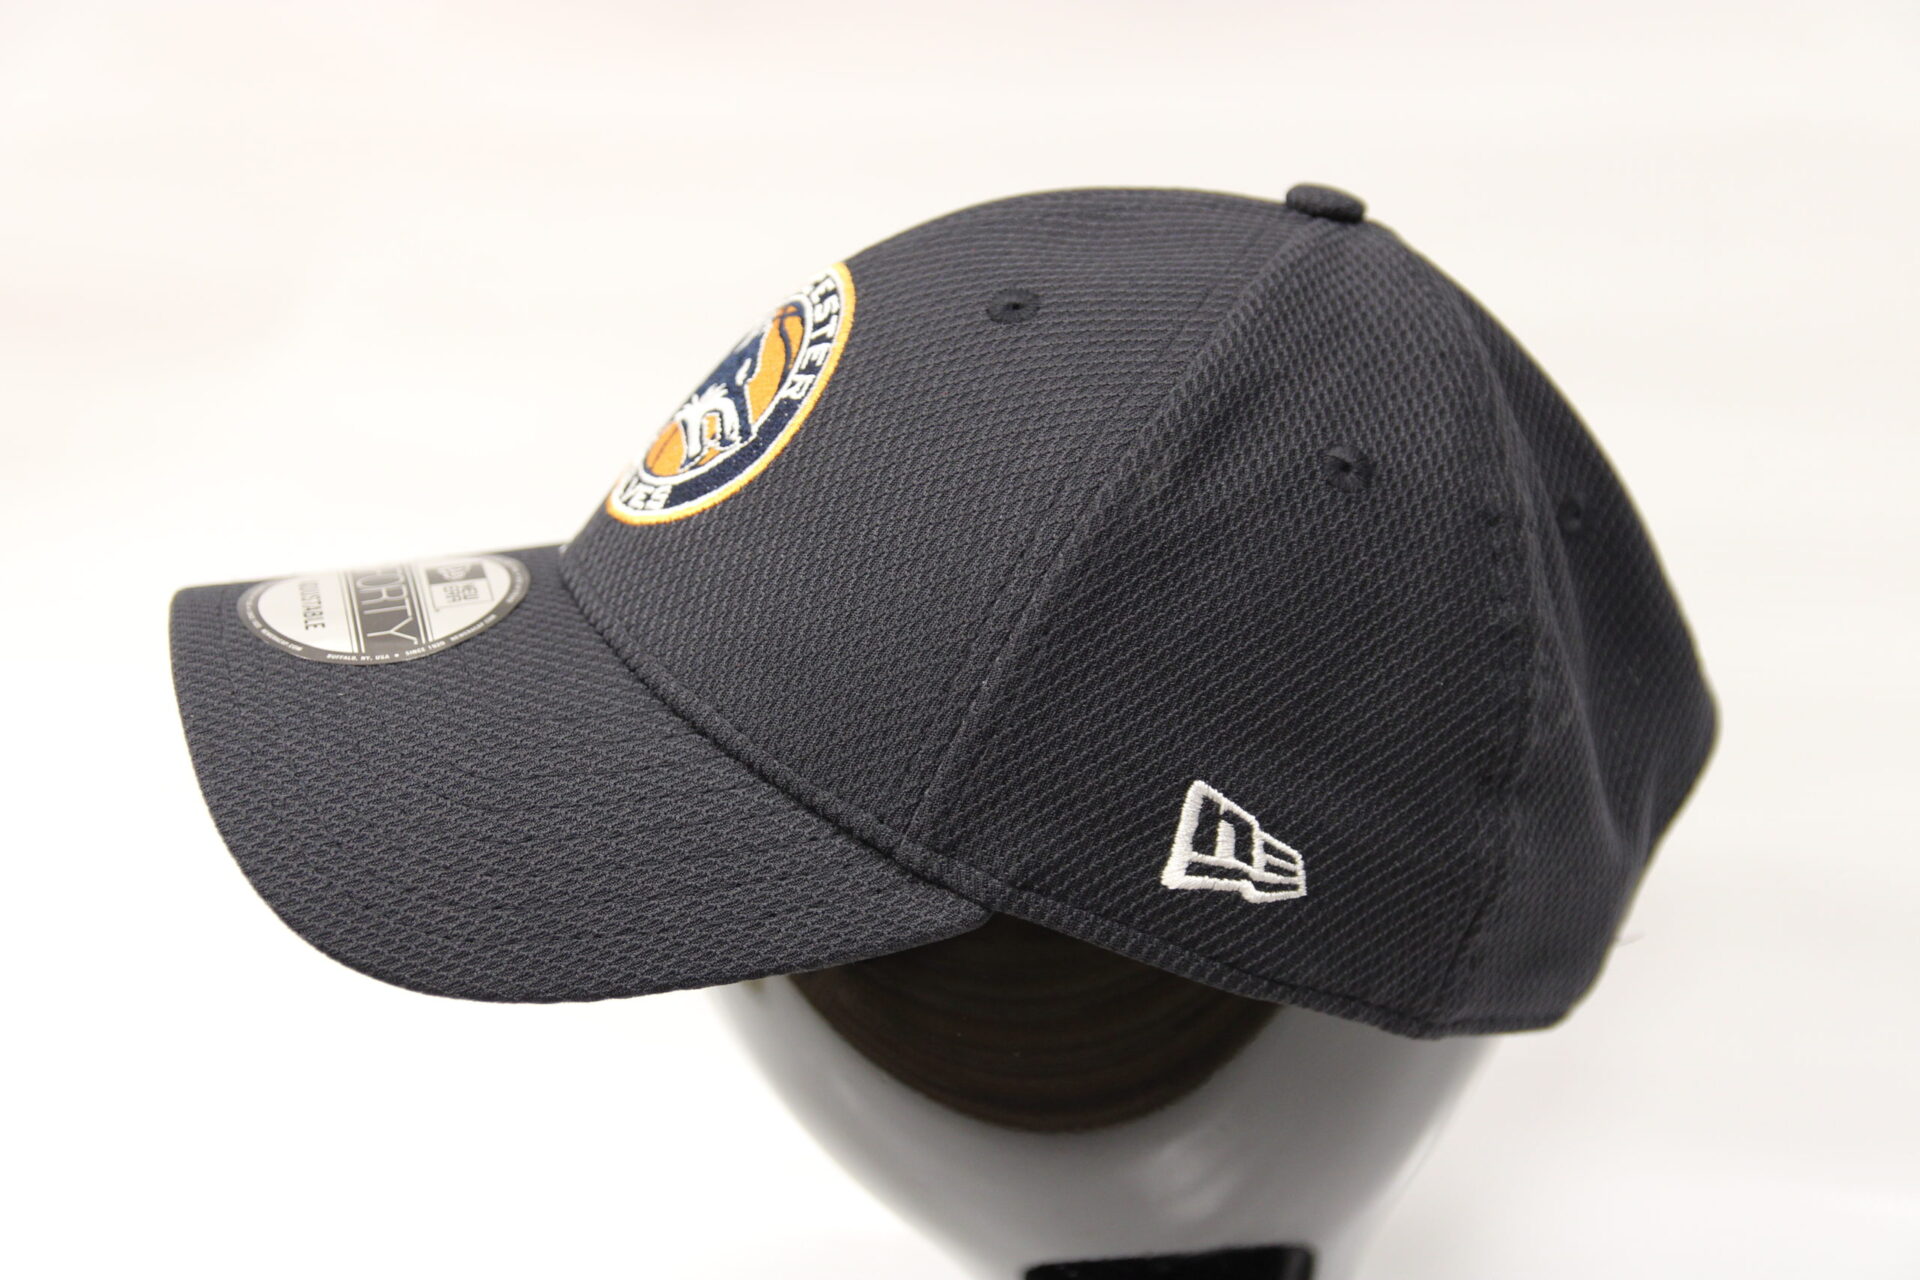 Worcester Wolves Anniversary New Era Cap - Worcester Wolves Basketball Club